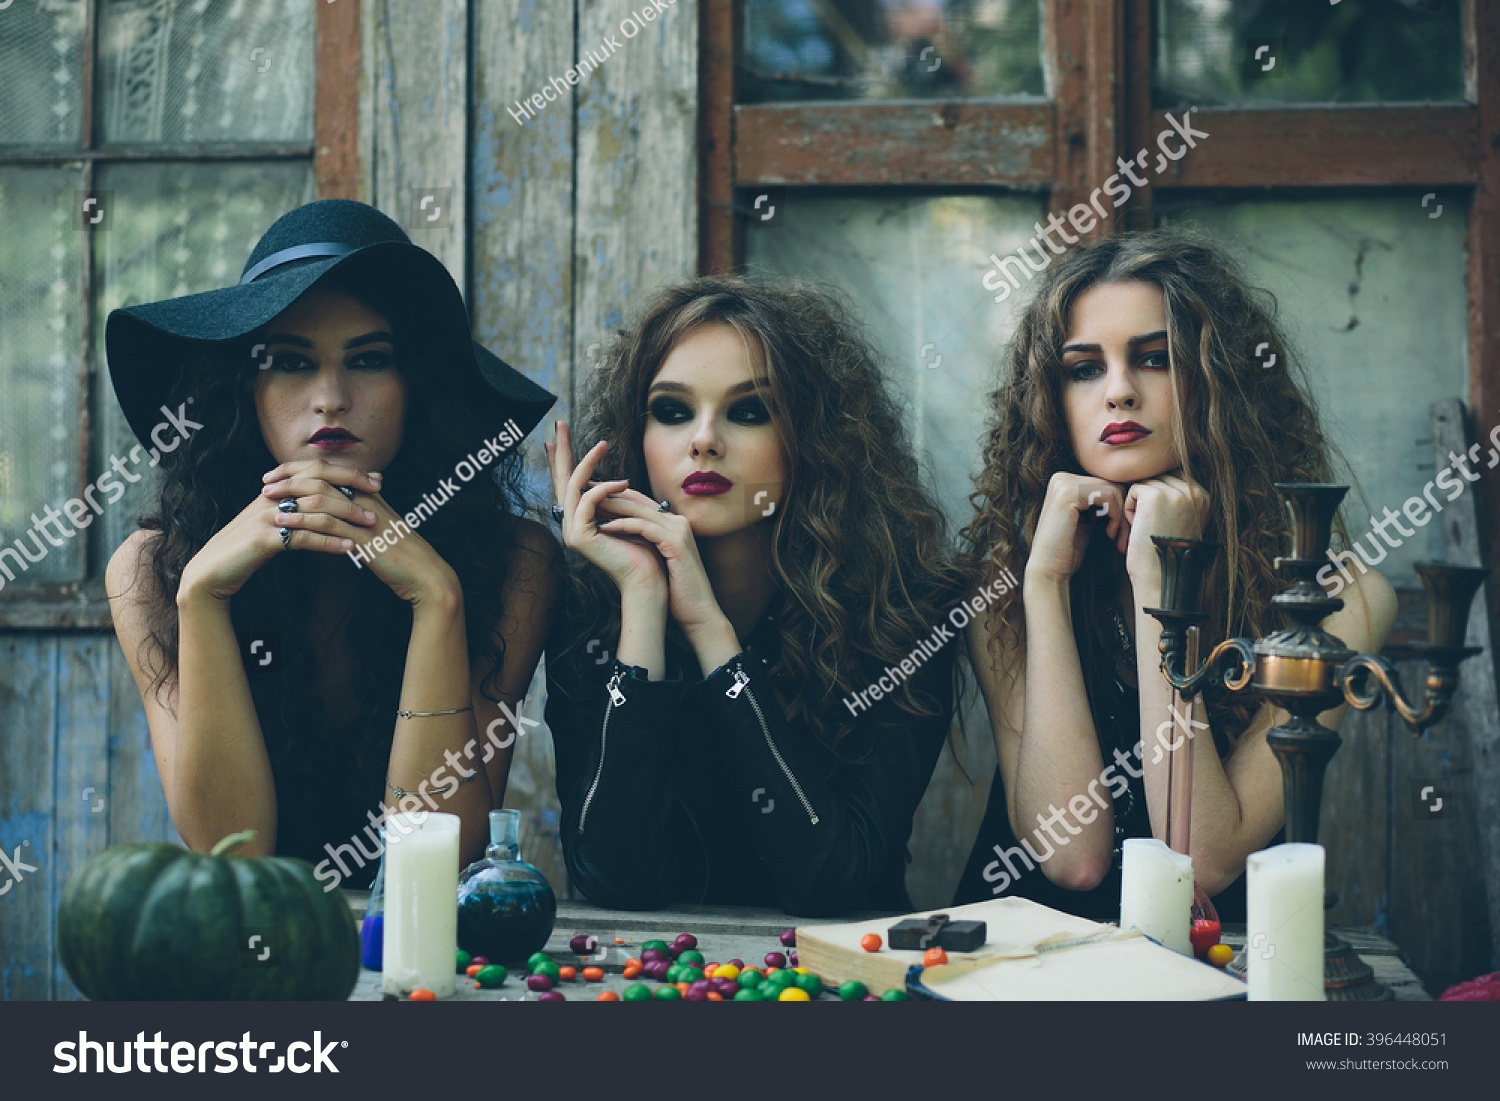 three witches are sitting at a table on the eve of Halloween #396448051